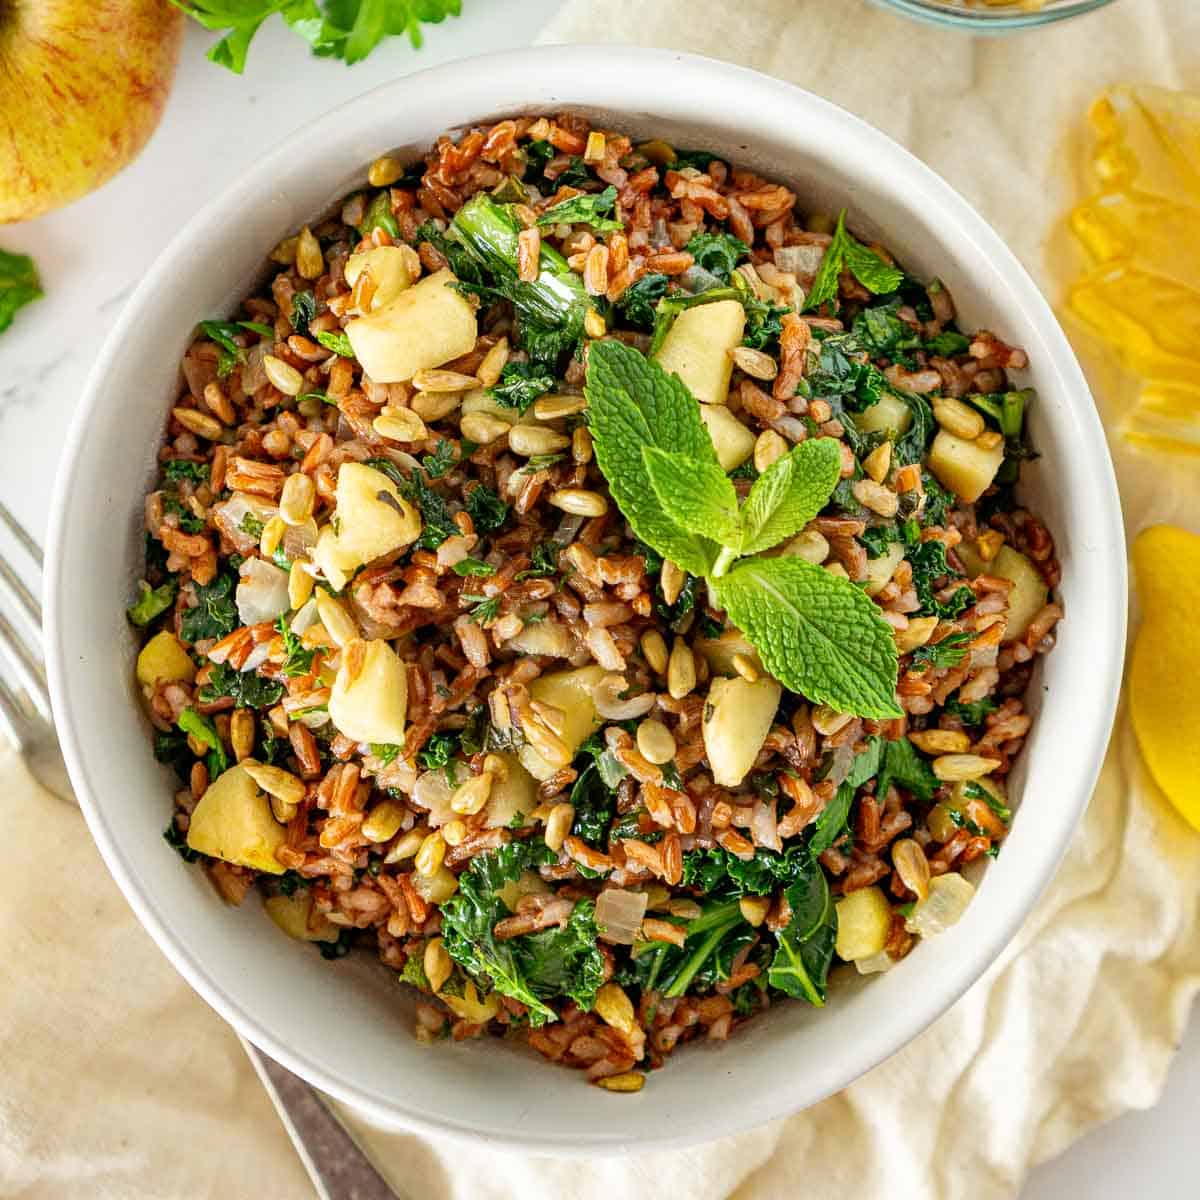 Red rice salad with apples and kale in a white bowl.